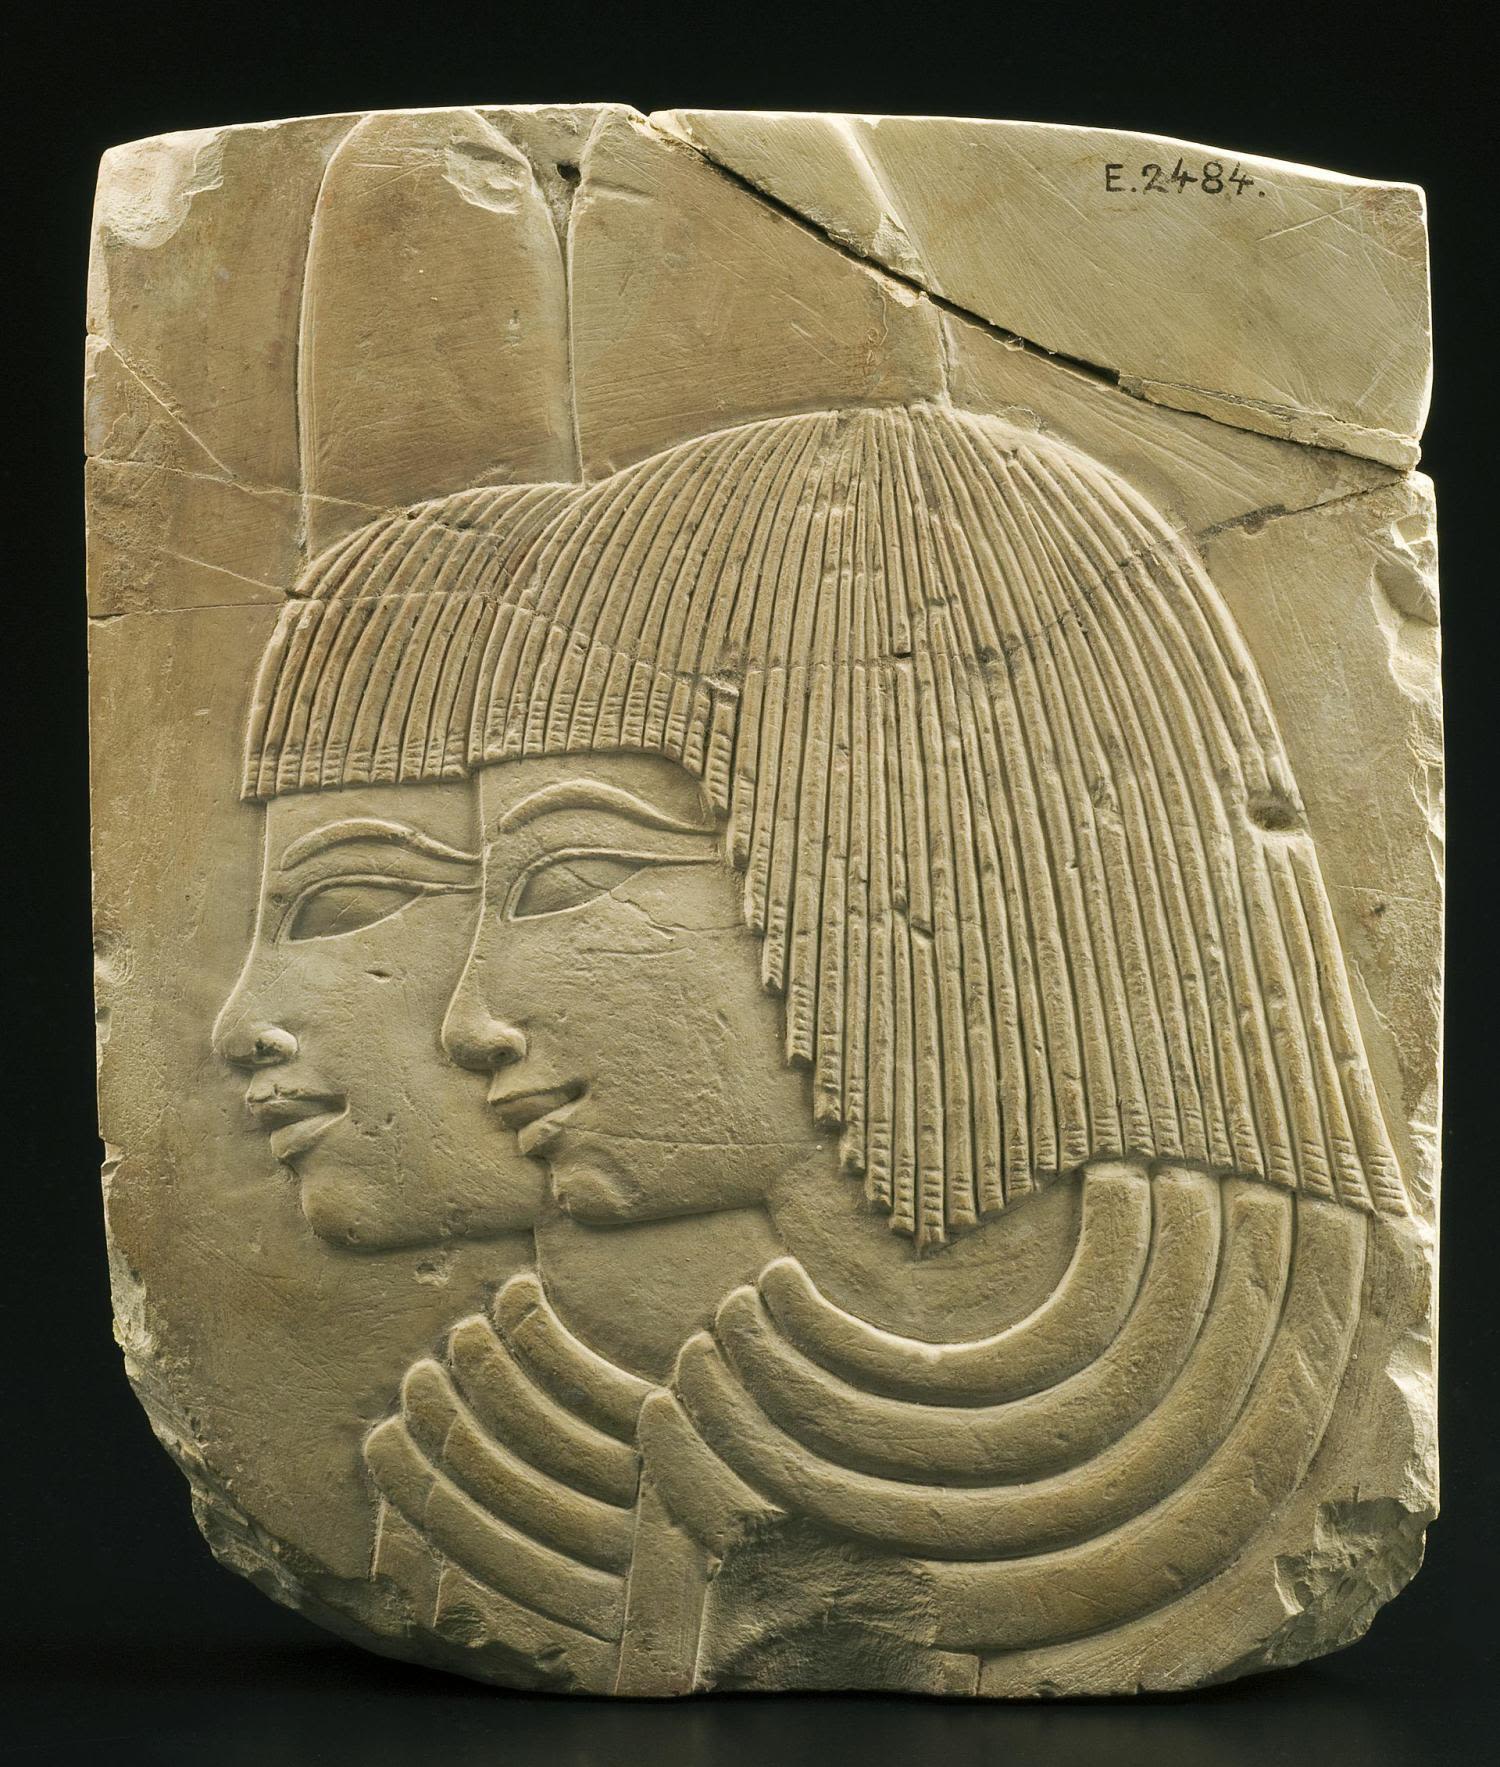 a gray stone slab on a black background with a relief sculpture of two female faces and necks pointing looking to the left, in Ancient Egyptian style